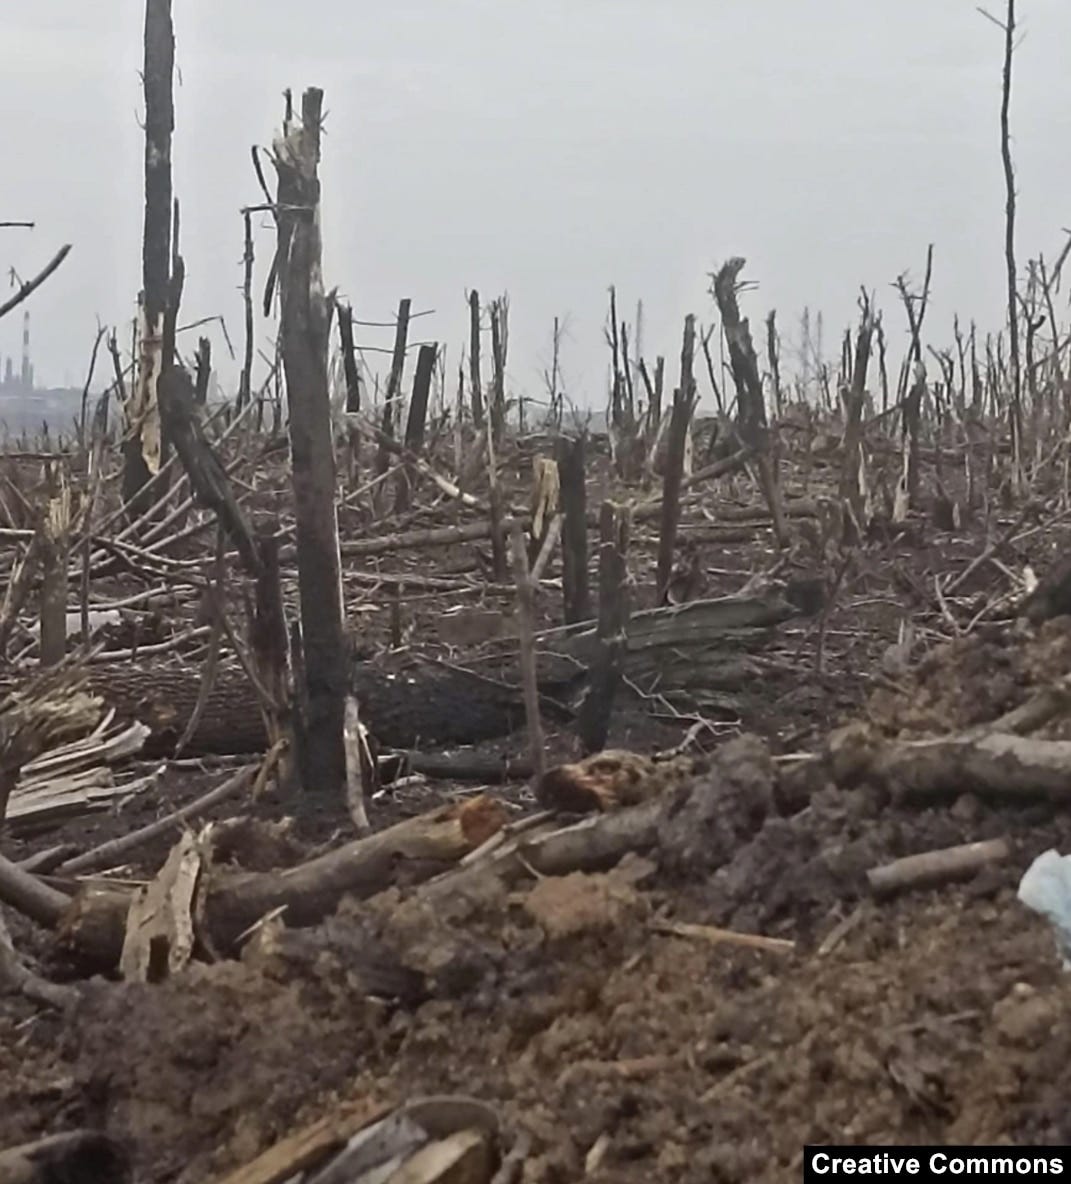 Echoes Of World War I Highlighted In Mud, Shattered Trees Of Ukraine